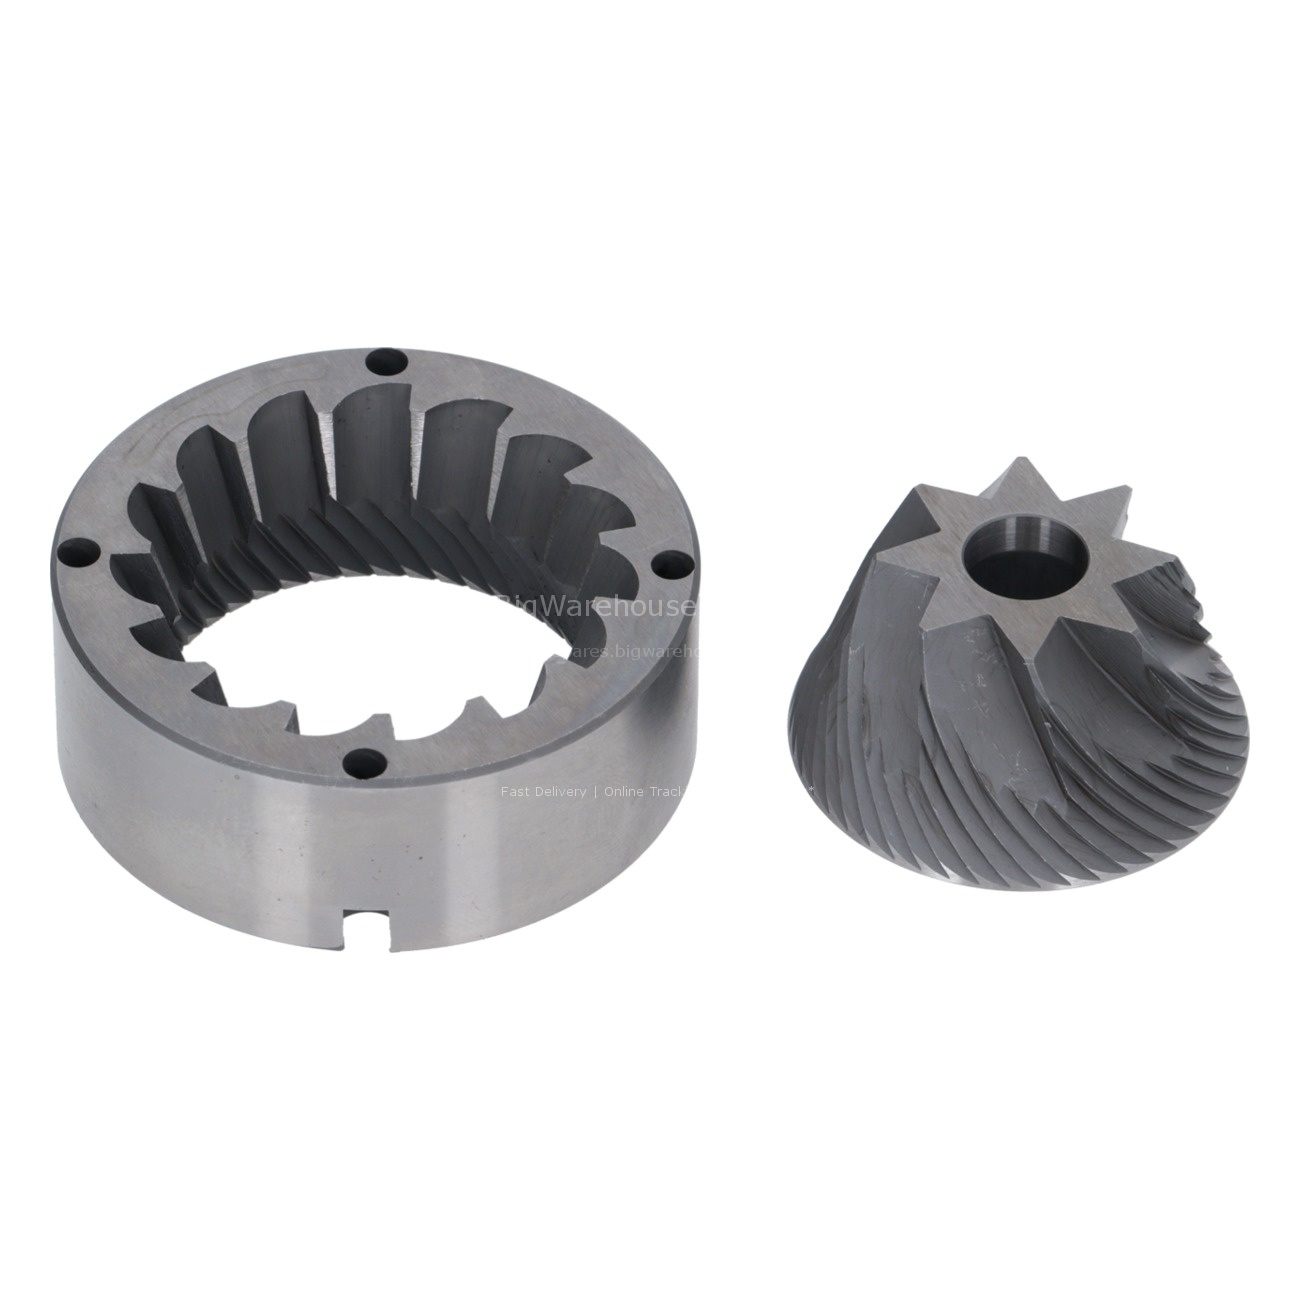 GRINDING BURRS PAIR CONICAL RH